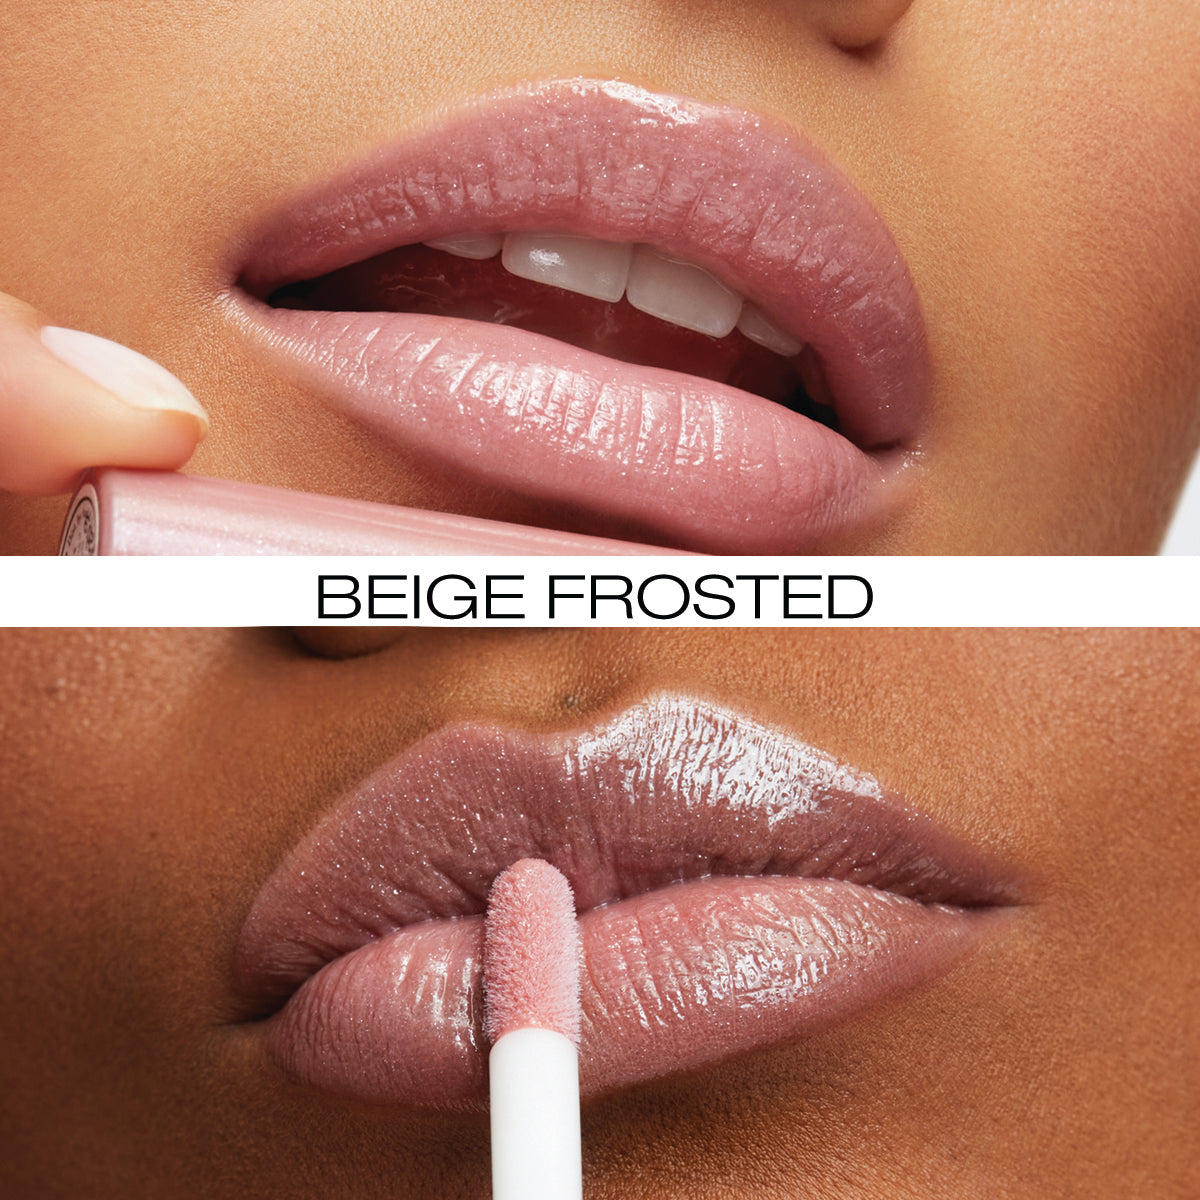 Beige frosted mini lip gloss demonstration applied to two different shades of lips